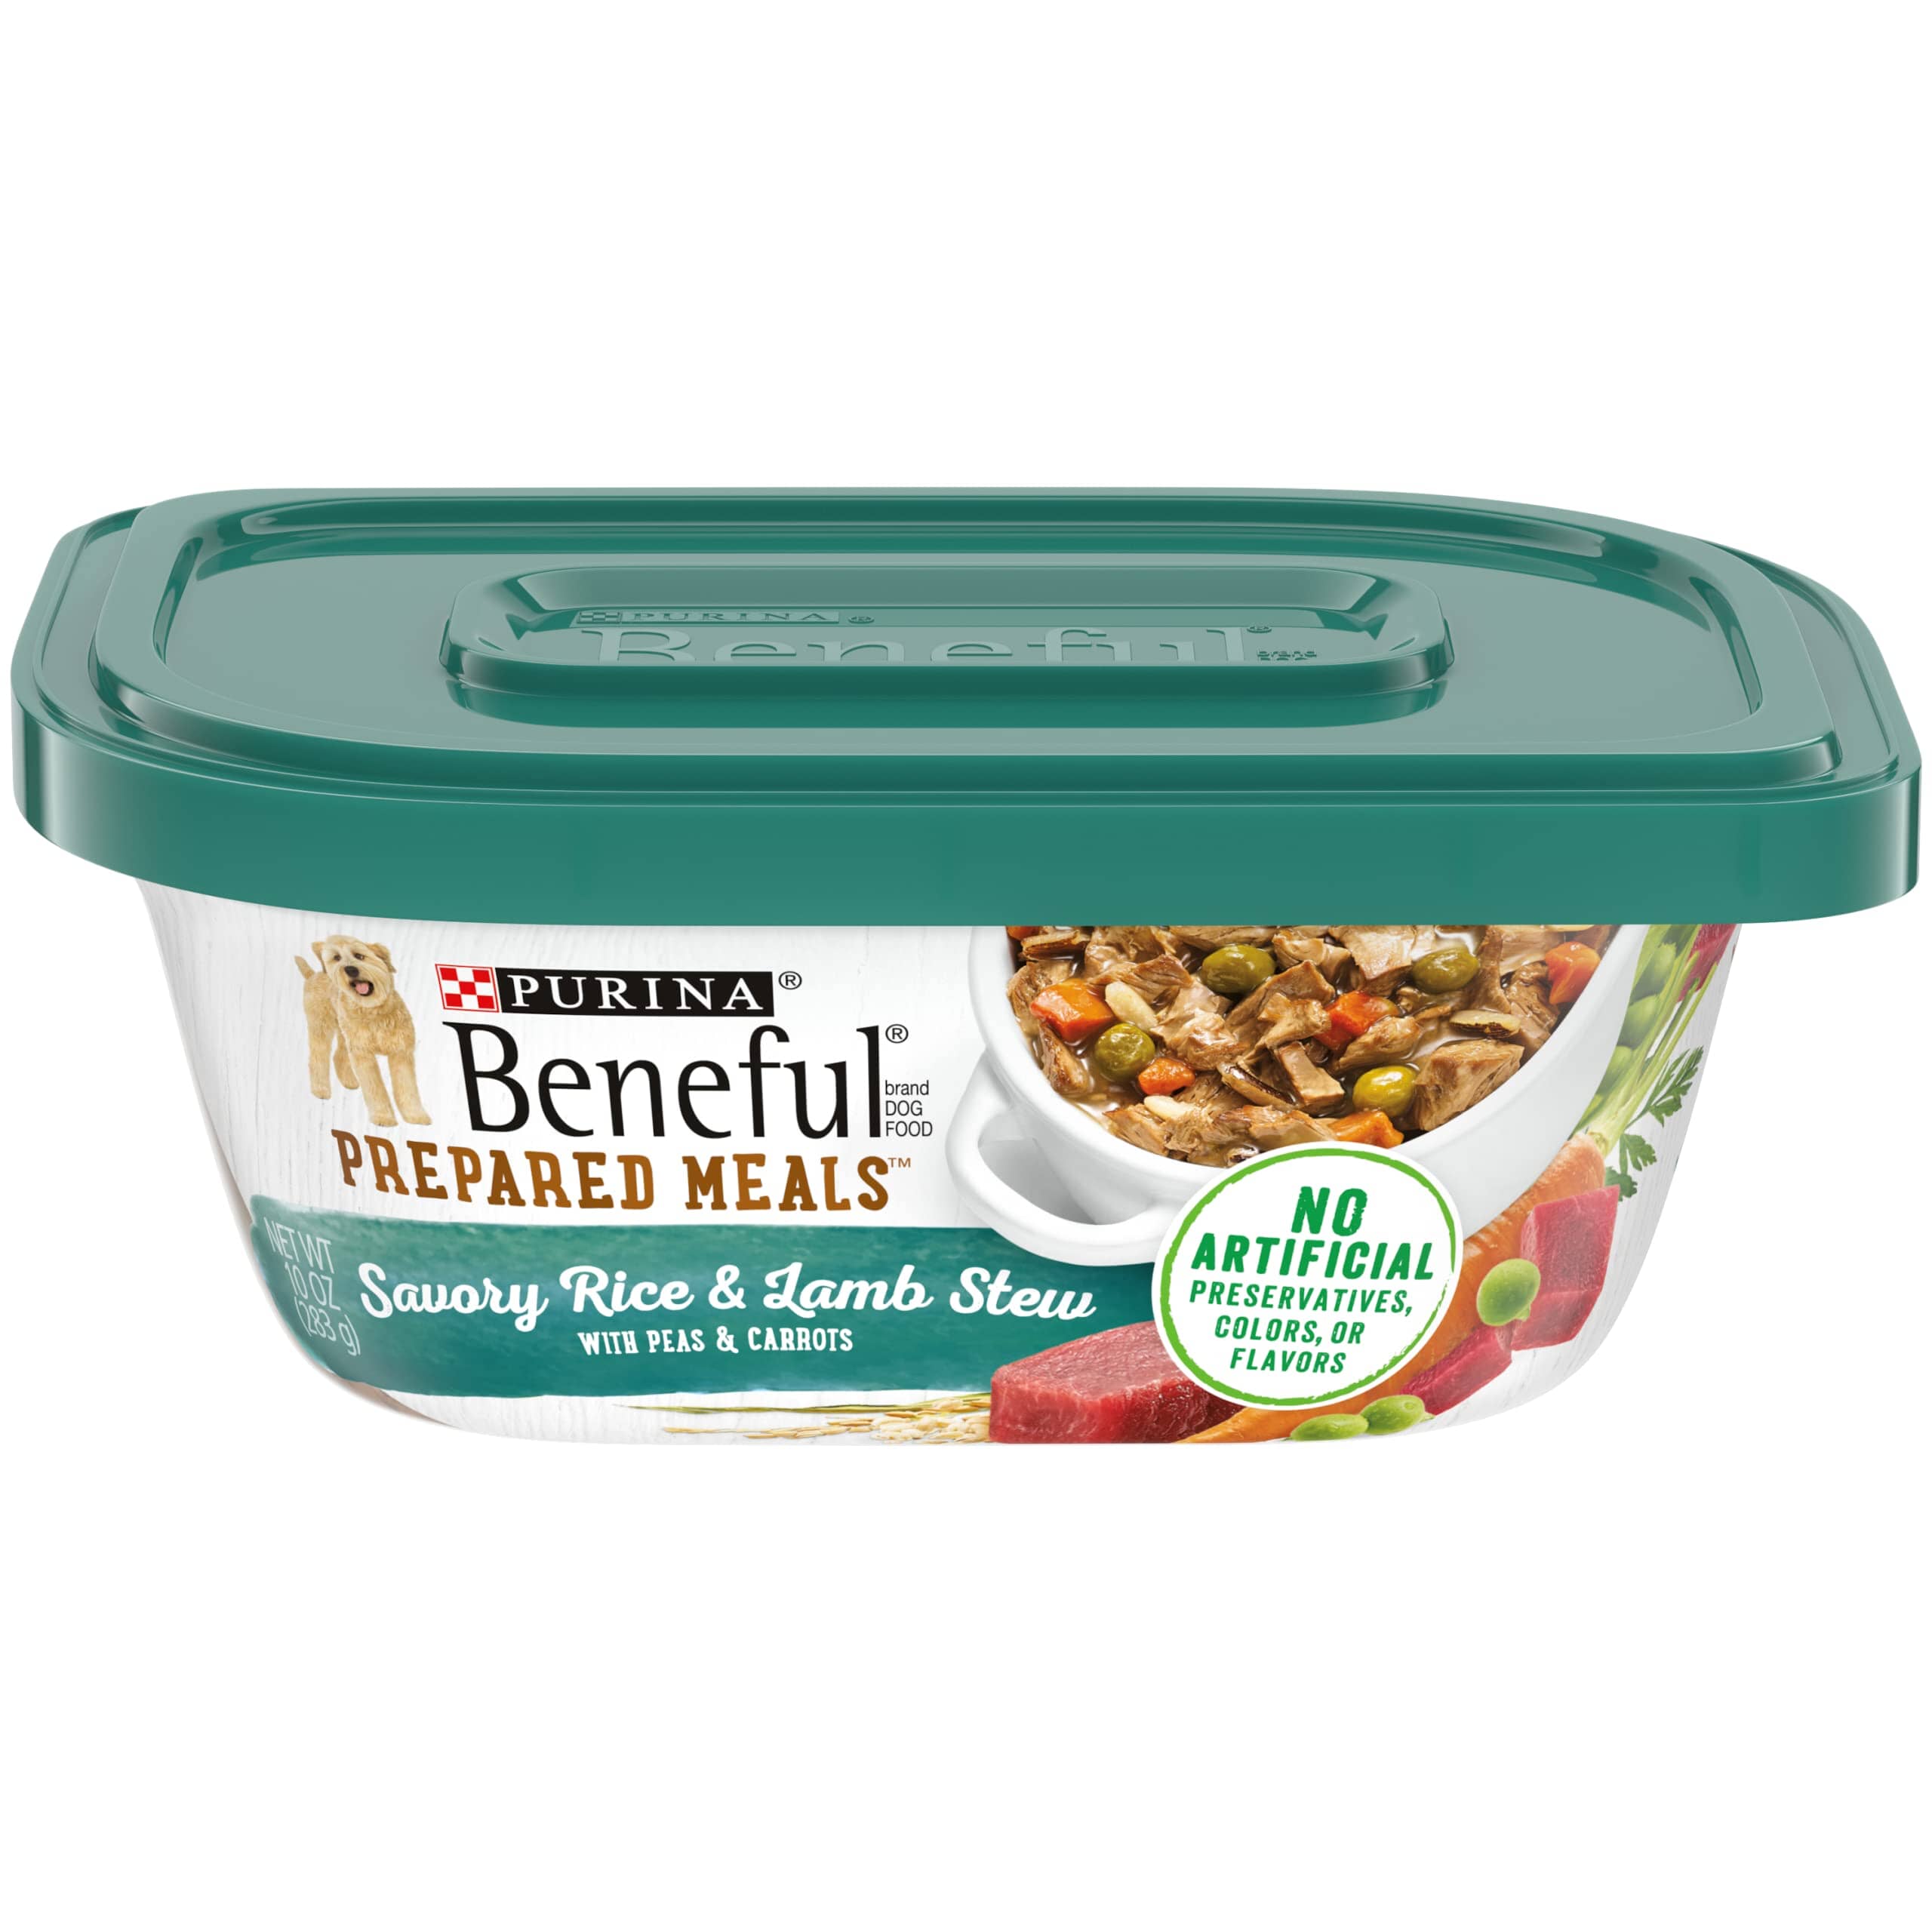 Purina Beneful Prepared Meals Rice and Lamb Stew with Peas and Carrots Wet Dog Food Trays - 10 Oz - Case of 8  